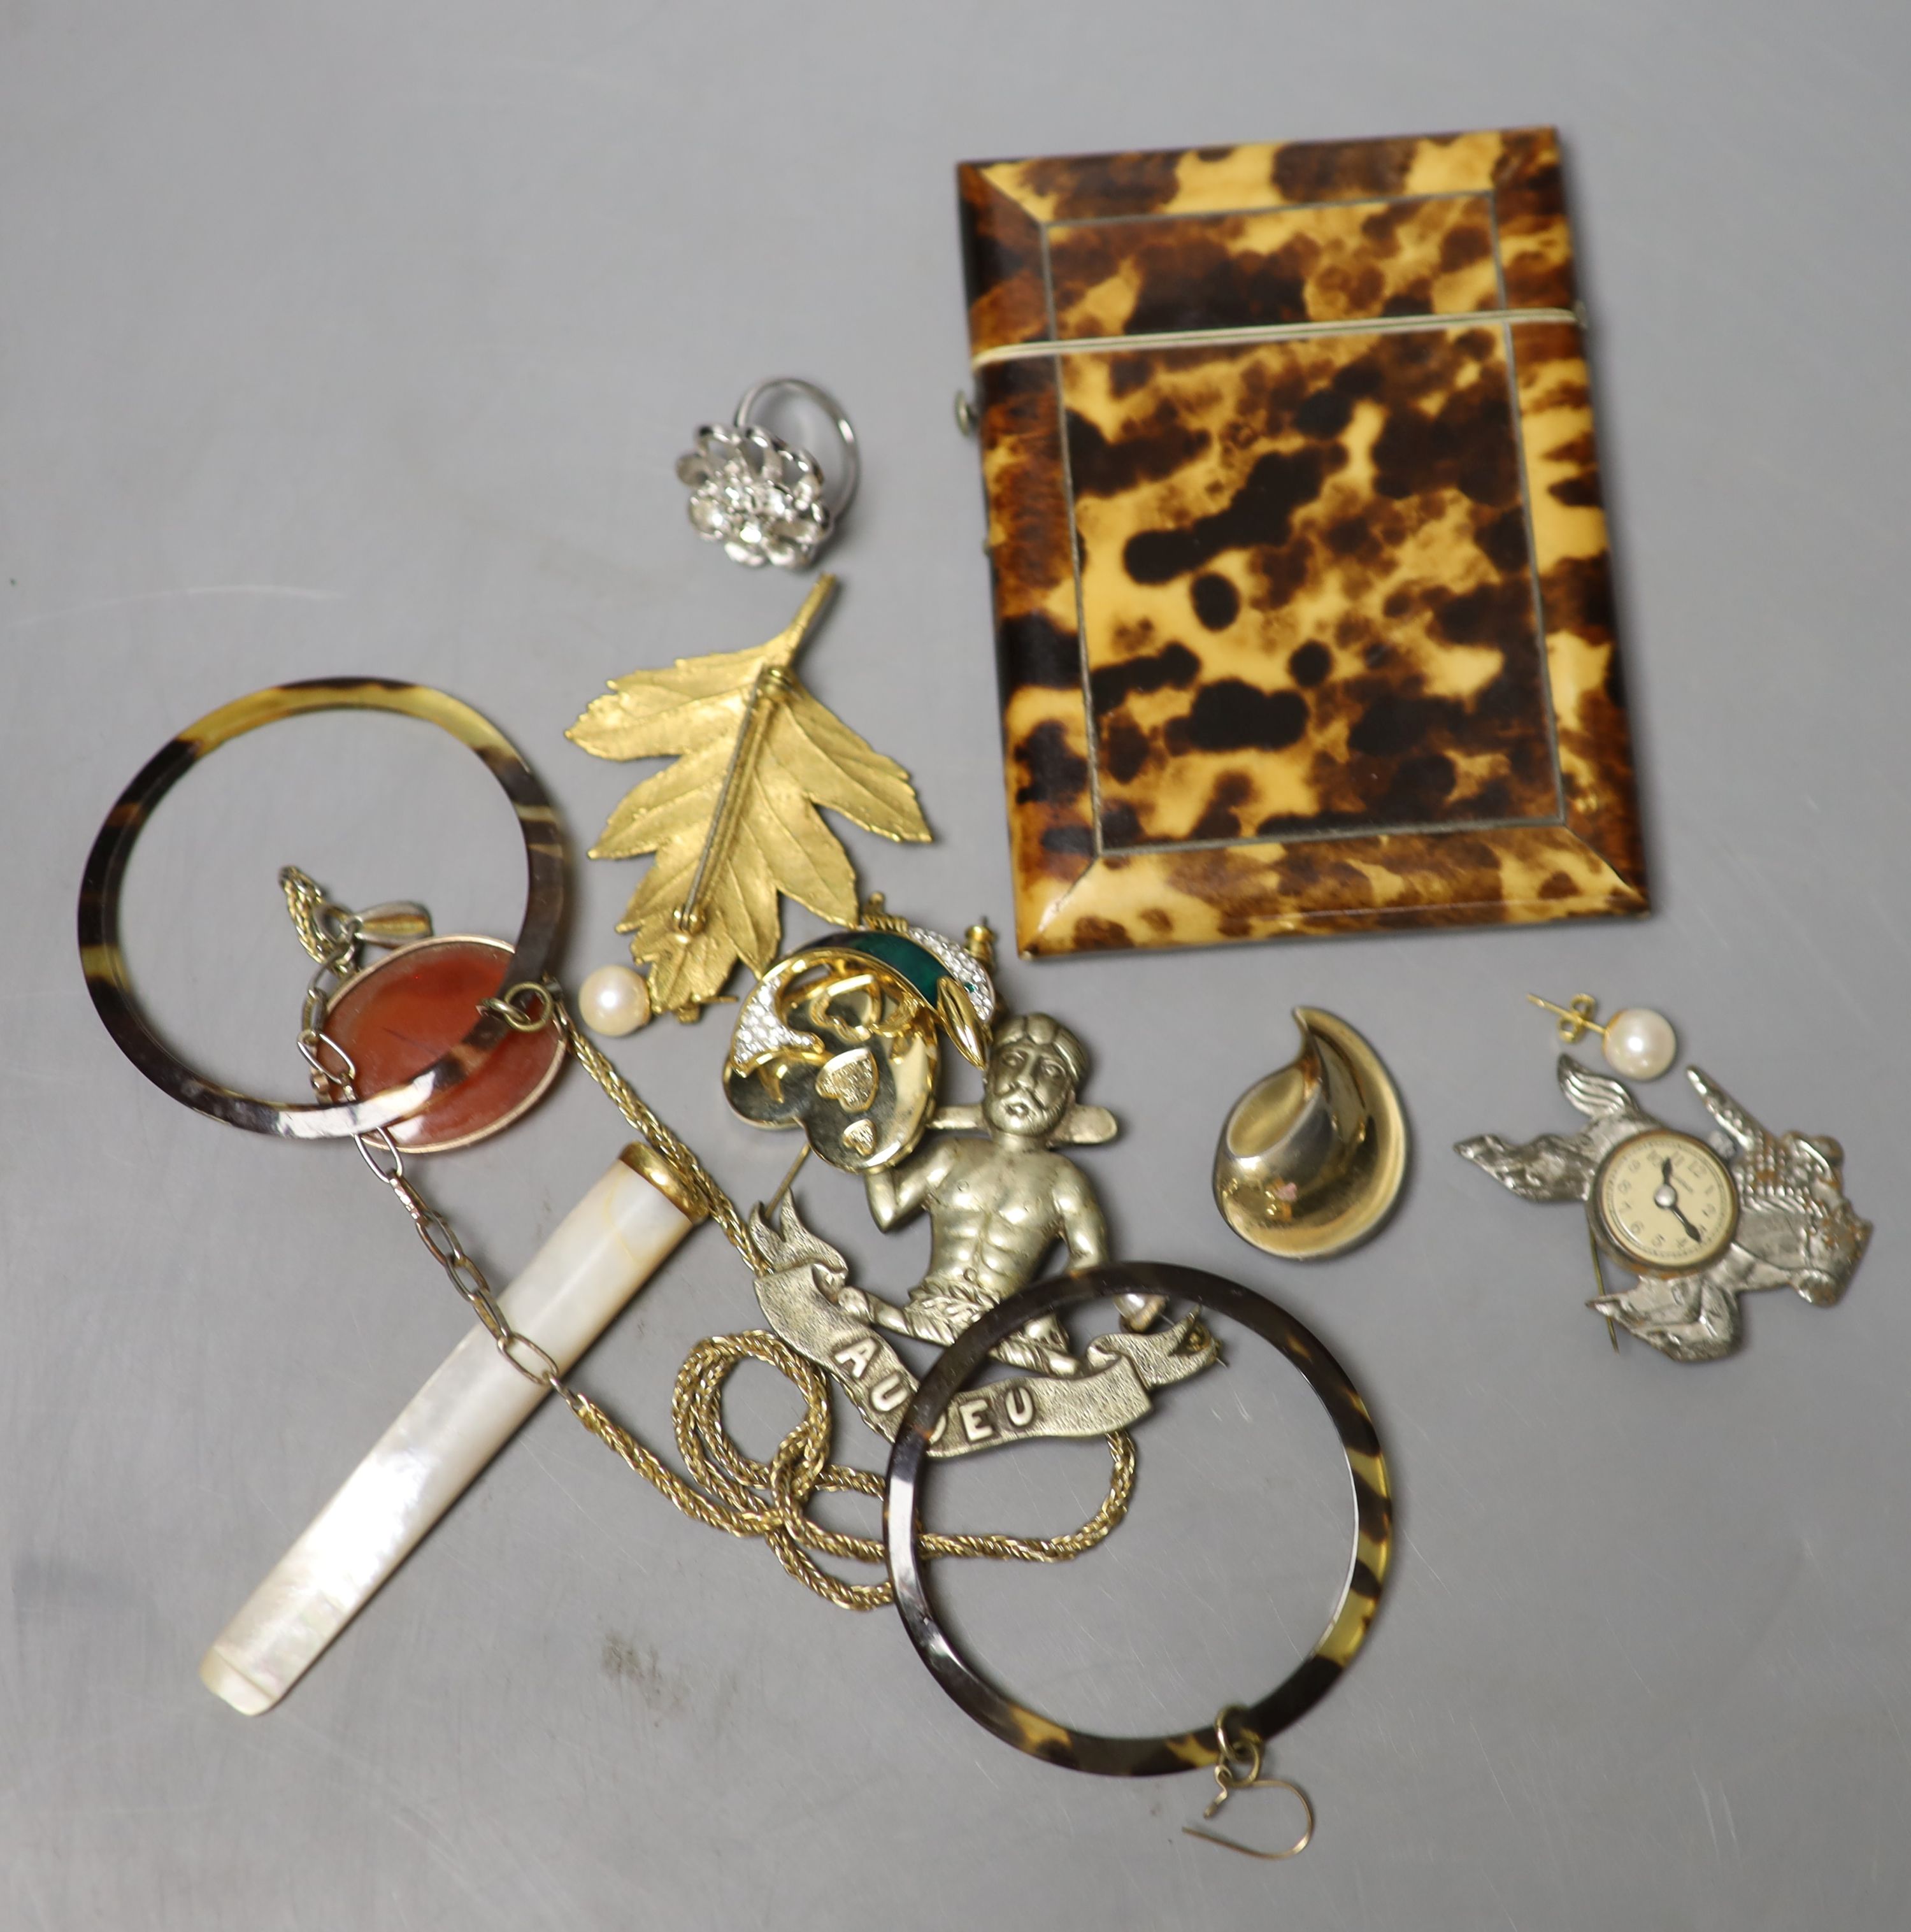 A 19th century tortoiseshell card case, 10.2cm, a pair of 14k and cultured pearl ear studs and a group of minor costume jewellery.